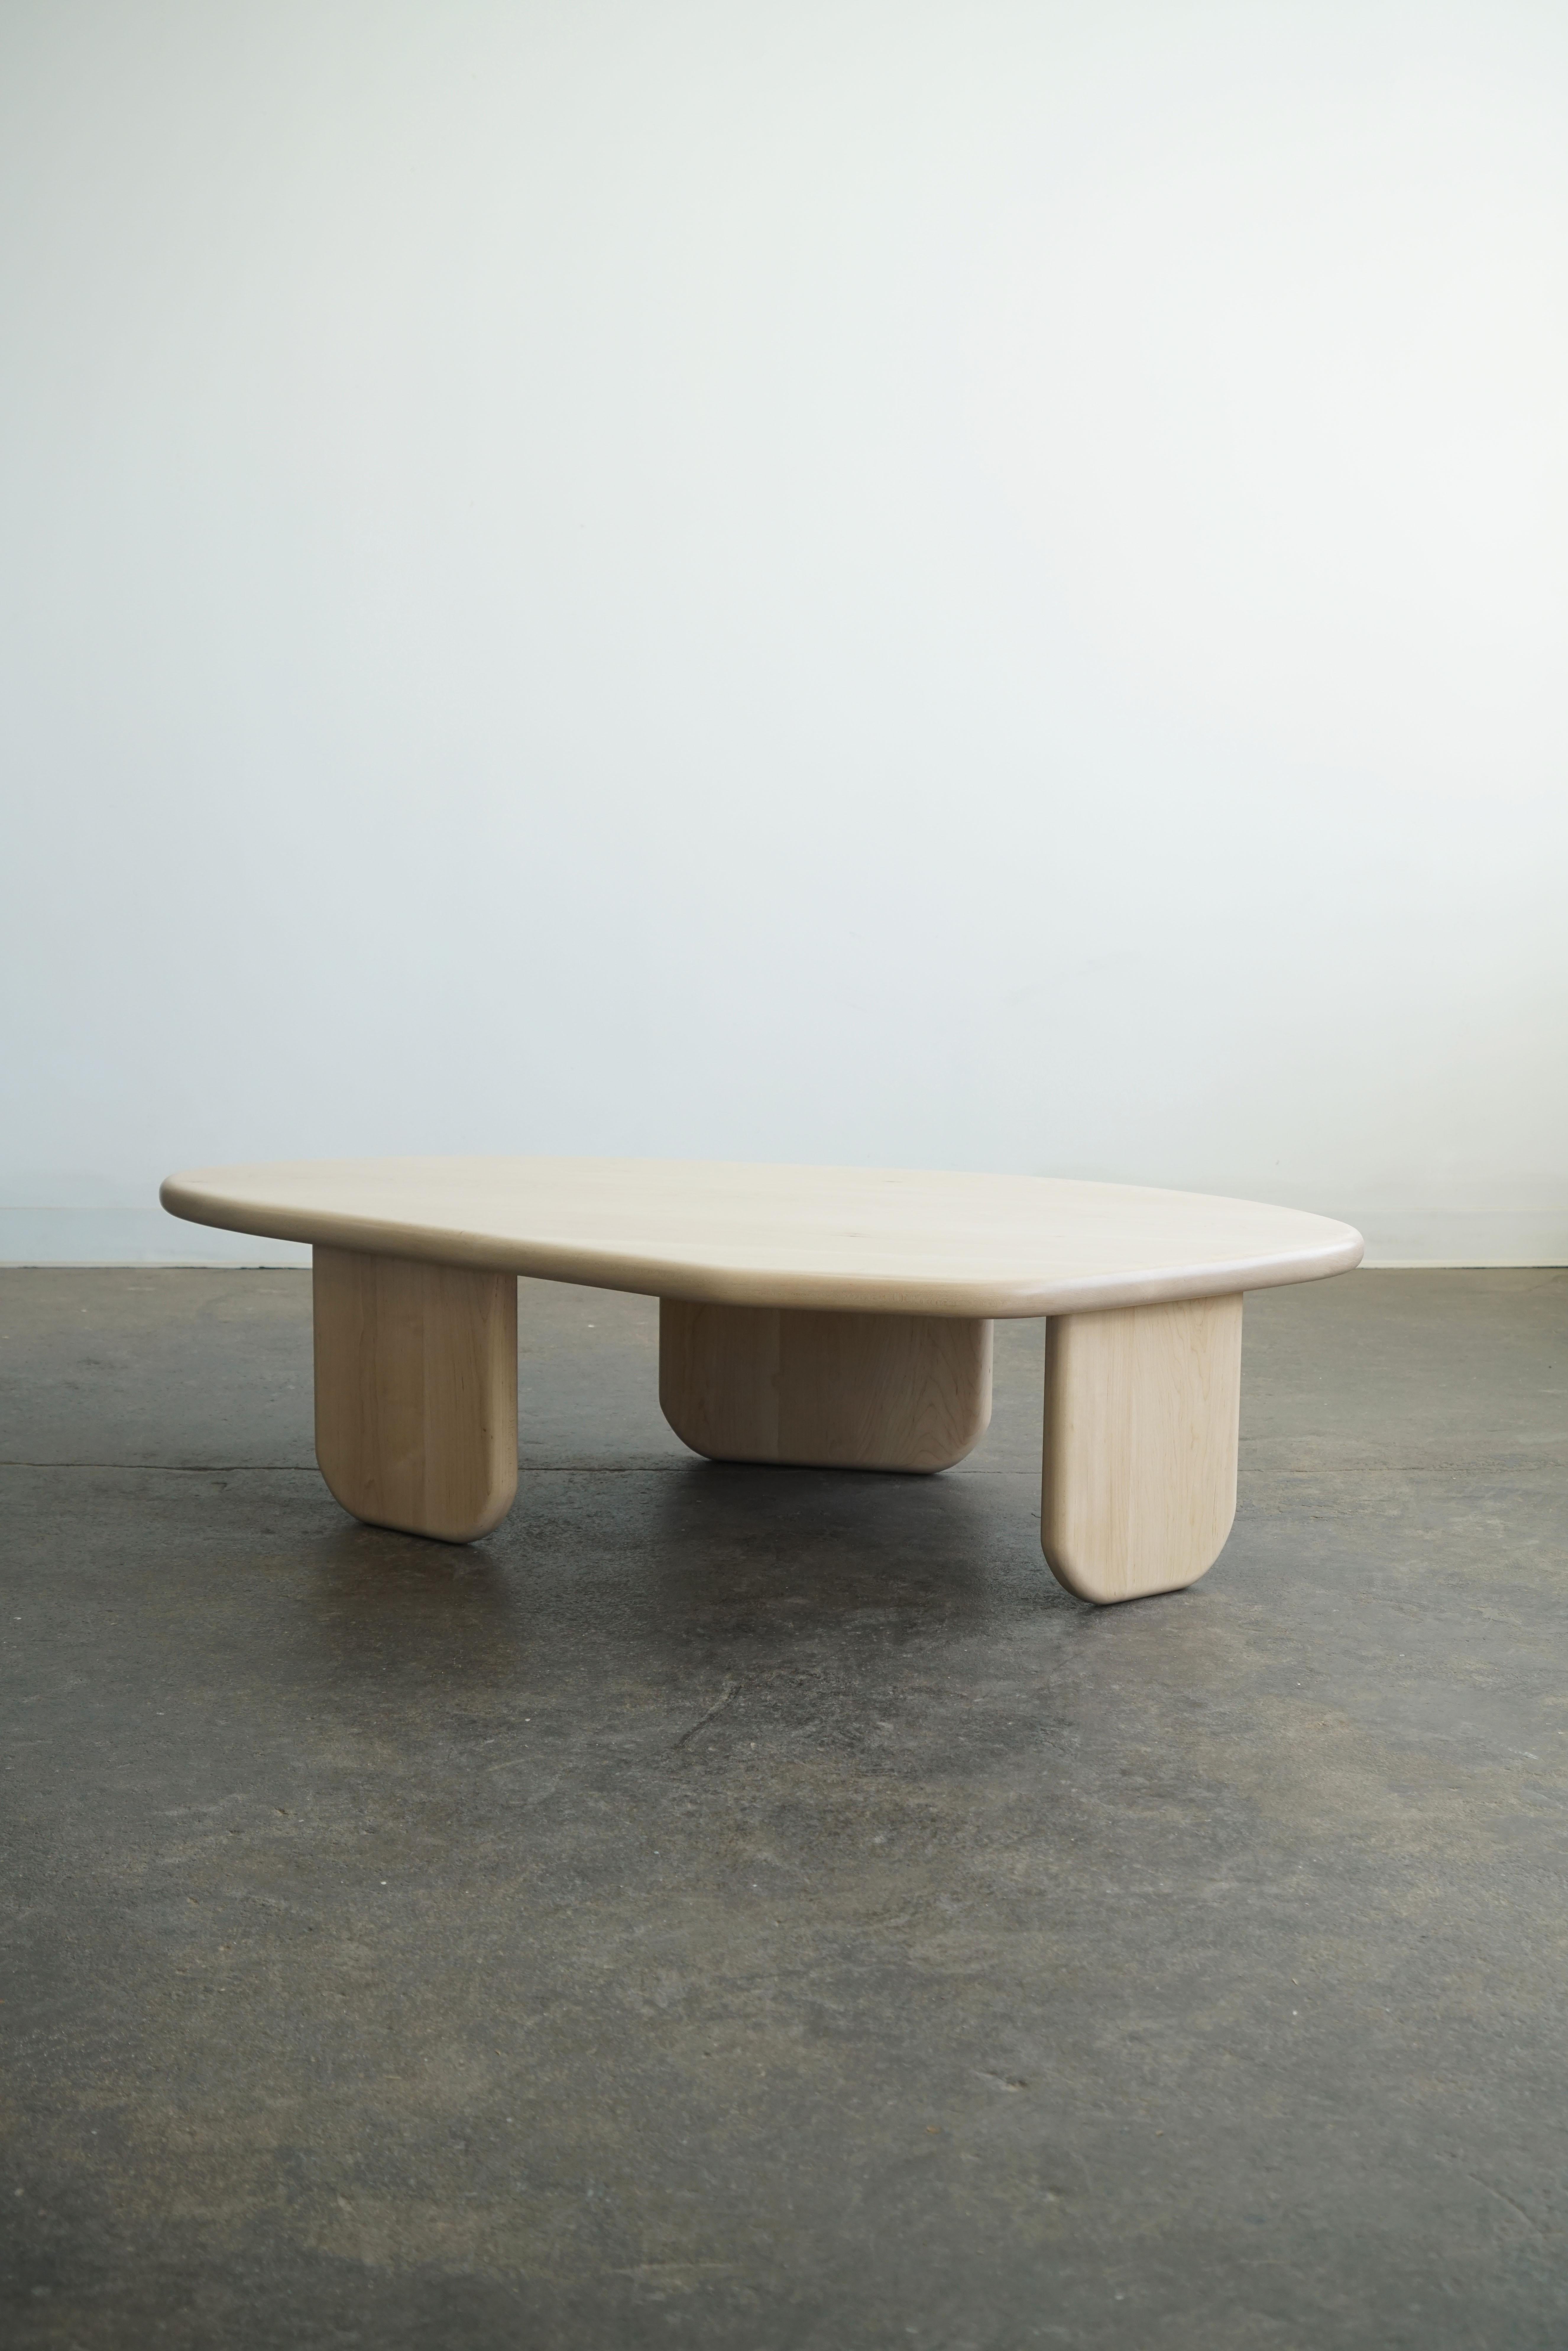 Organic shaped coffee table by Last Workshop.
in natural maple.

New, and made-to-order
Standard size: 58”L x 32”W x 15”H

Customers can also choose from:
Wood species, finishes, and overall dimensions.

The table has three different sized legs that